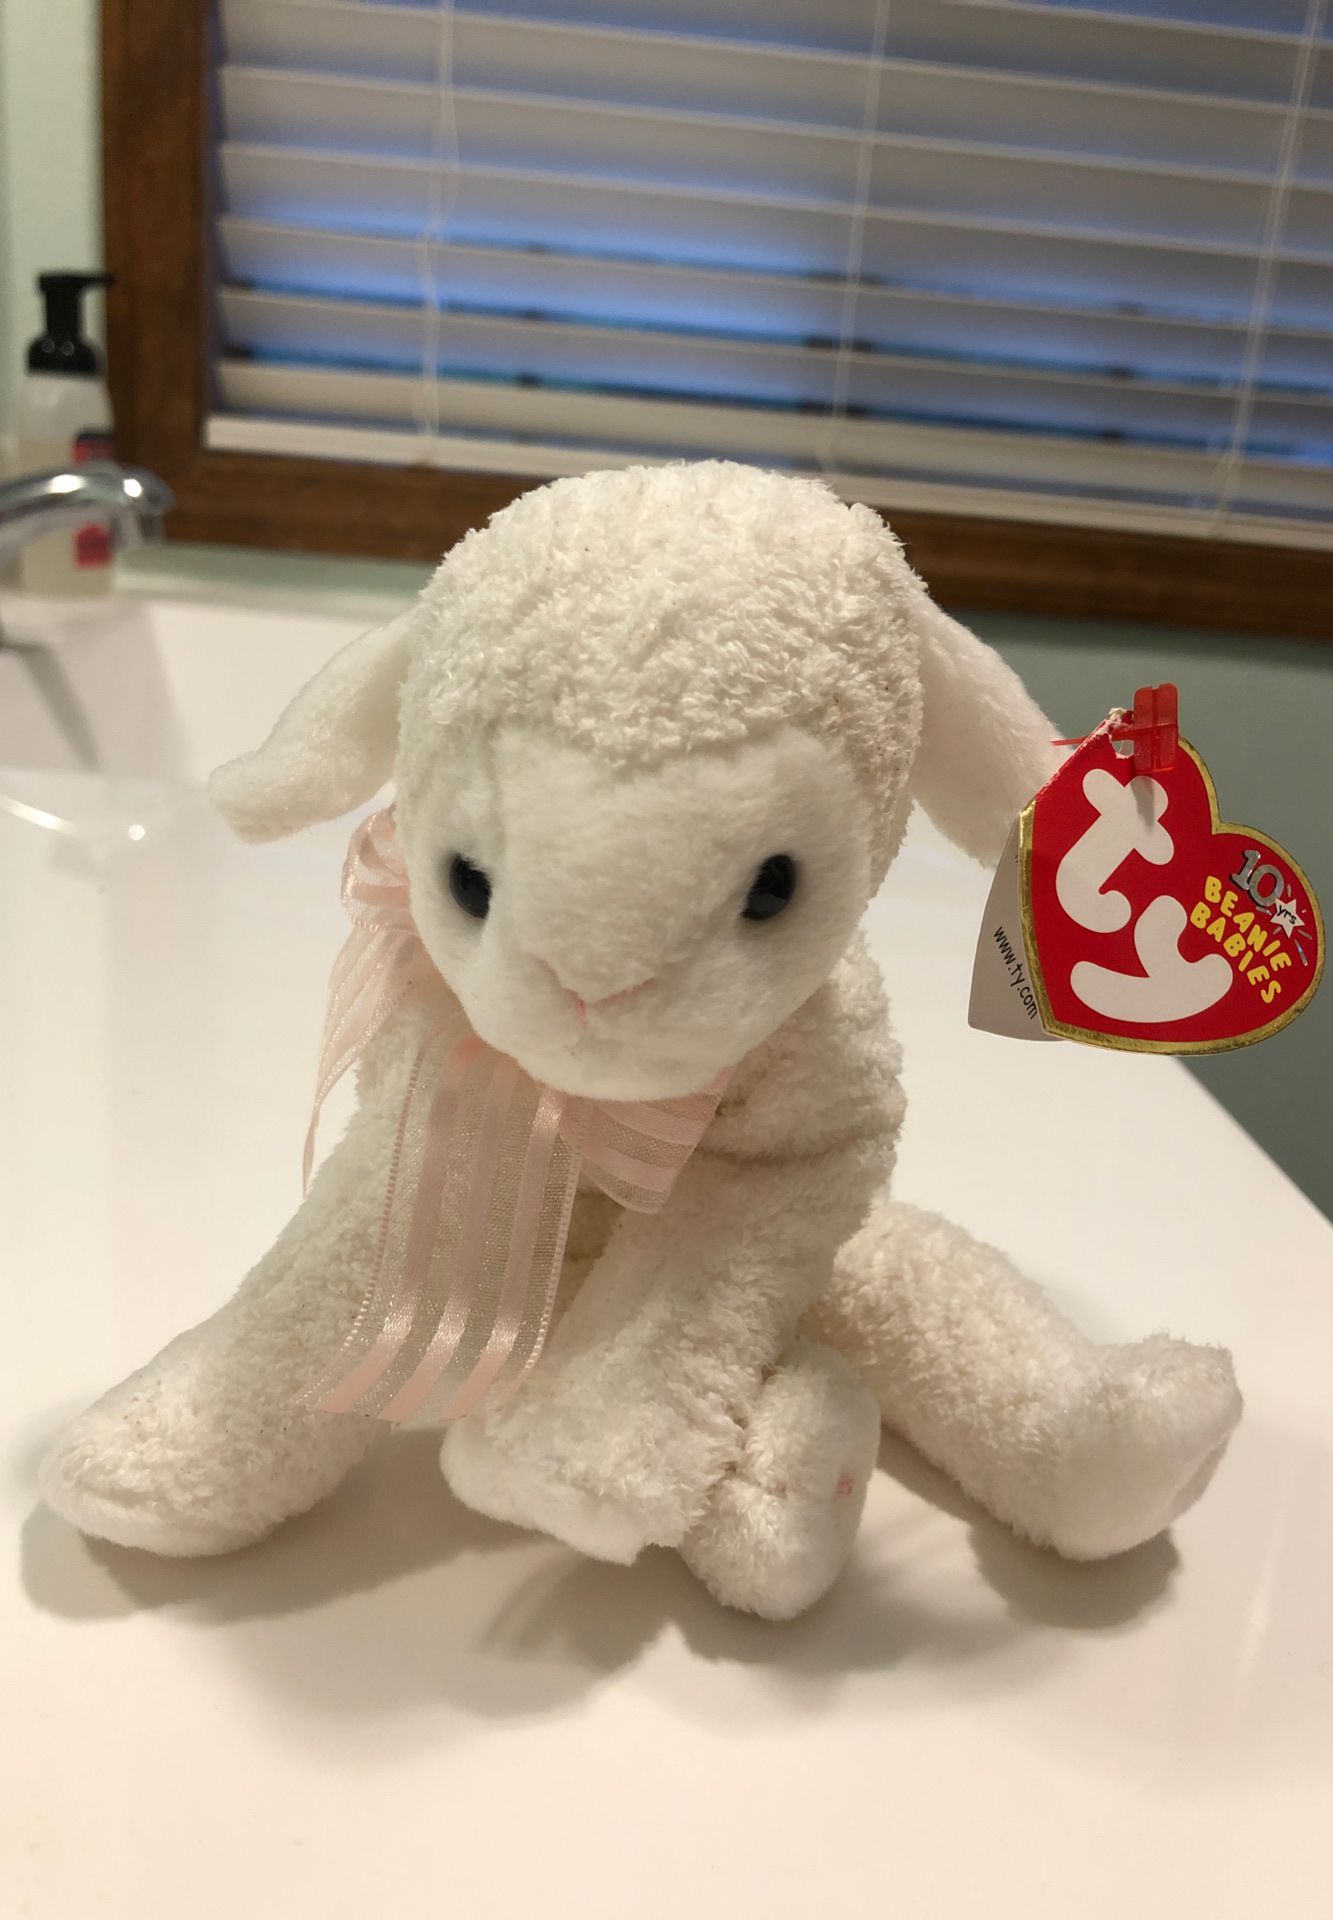 TY Beanie Baby Lullaby sheep from May 2002